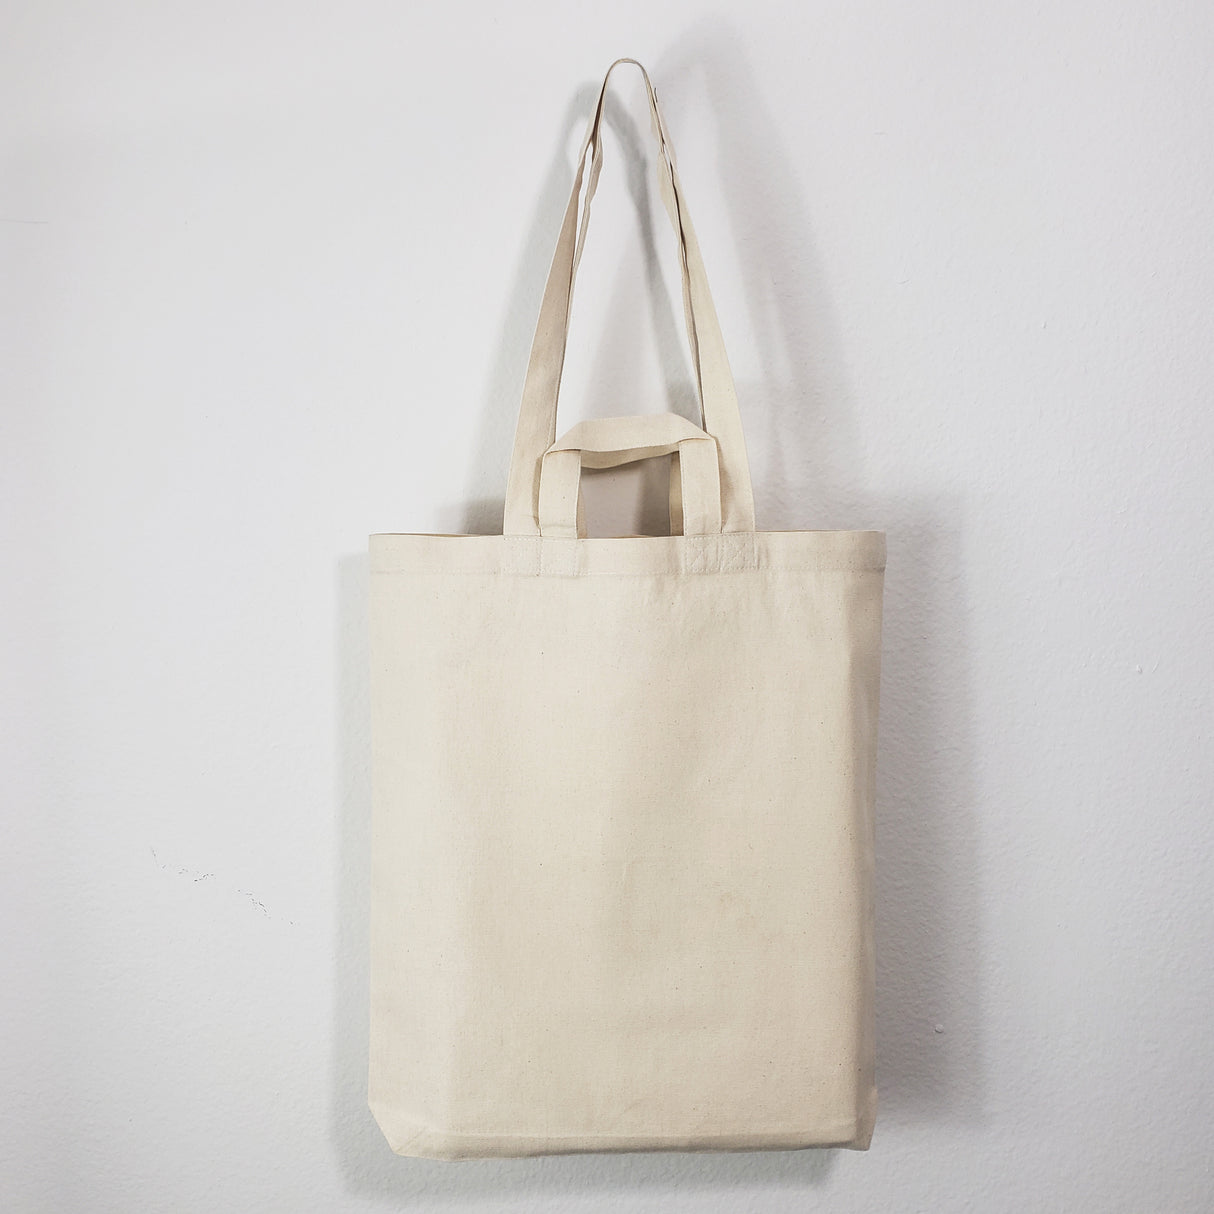 perfect size grocery totebag